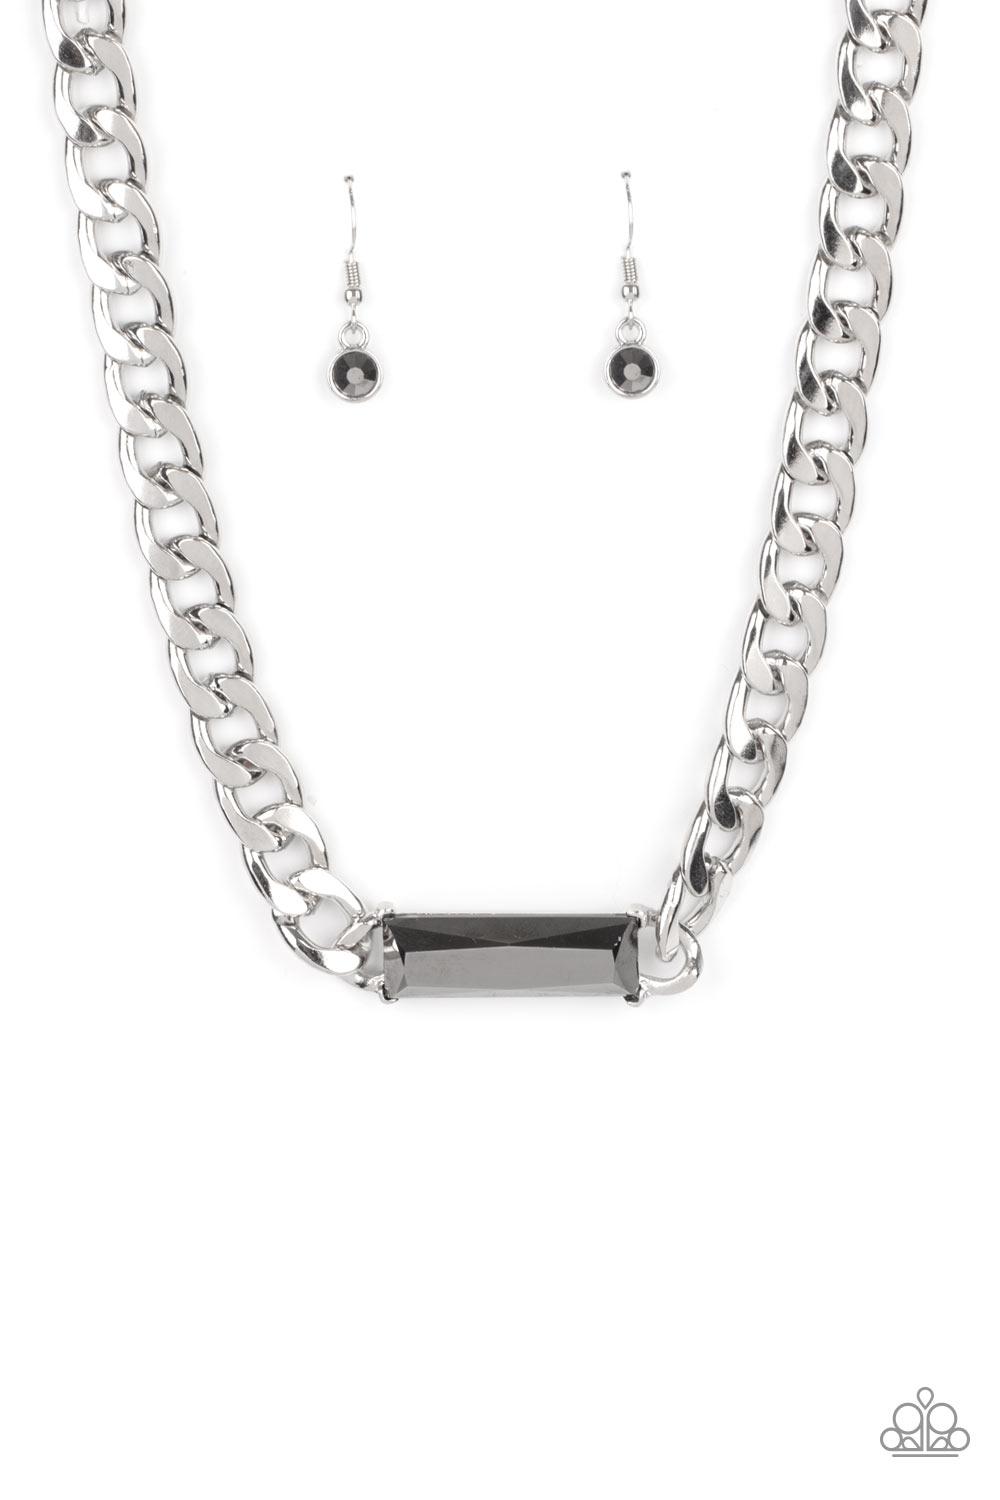 Urban Royalty Silver Chain and Hematite Rhinestone Necklace - Paparazzi Accessories- lightbox - CarasShop.com - $5 Jewelry by Cara Jewels